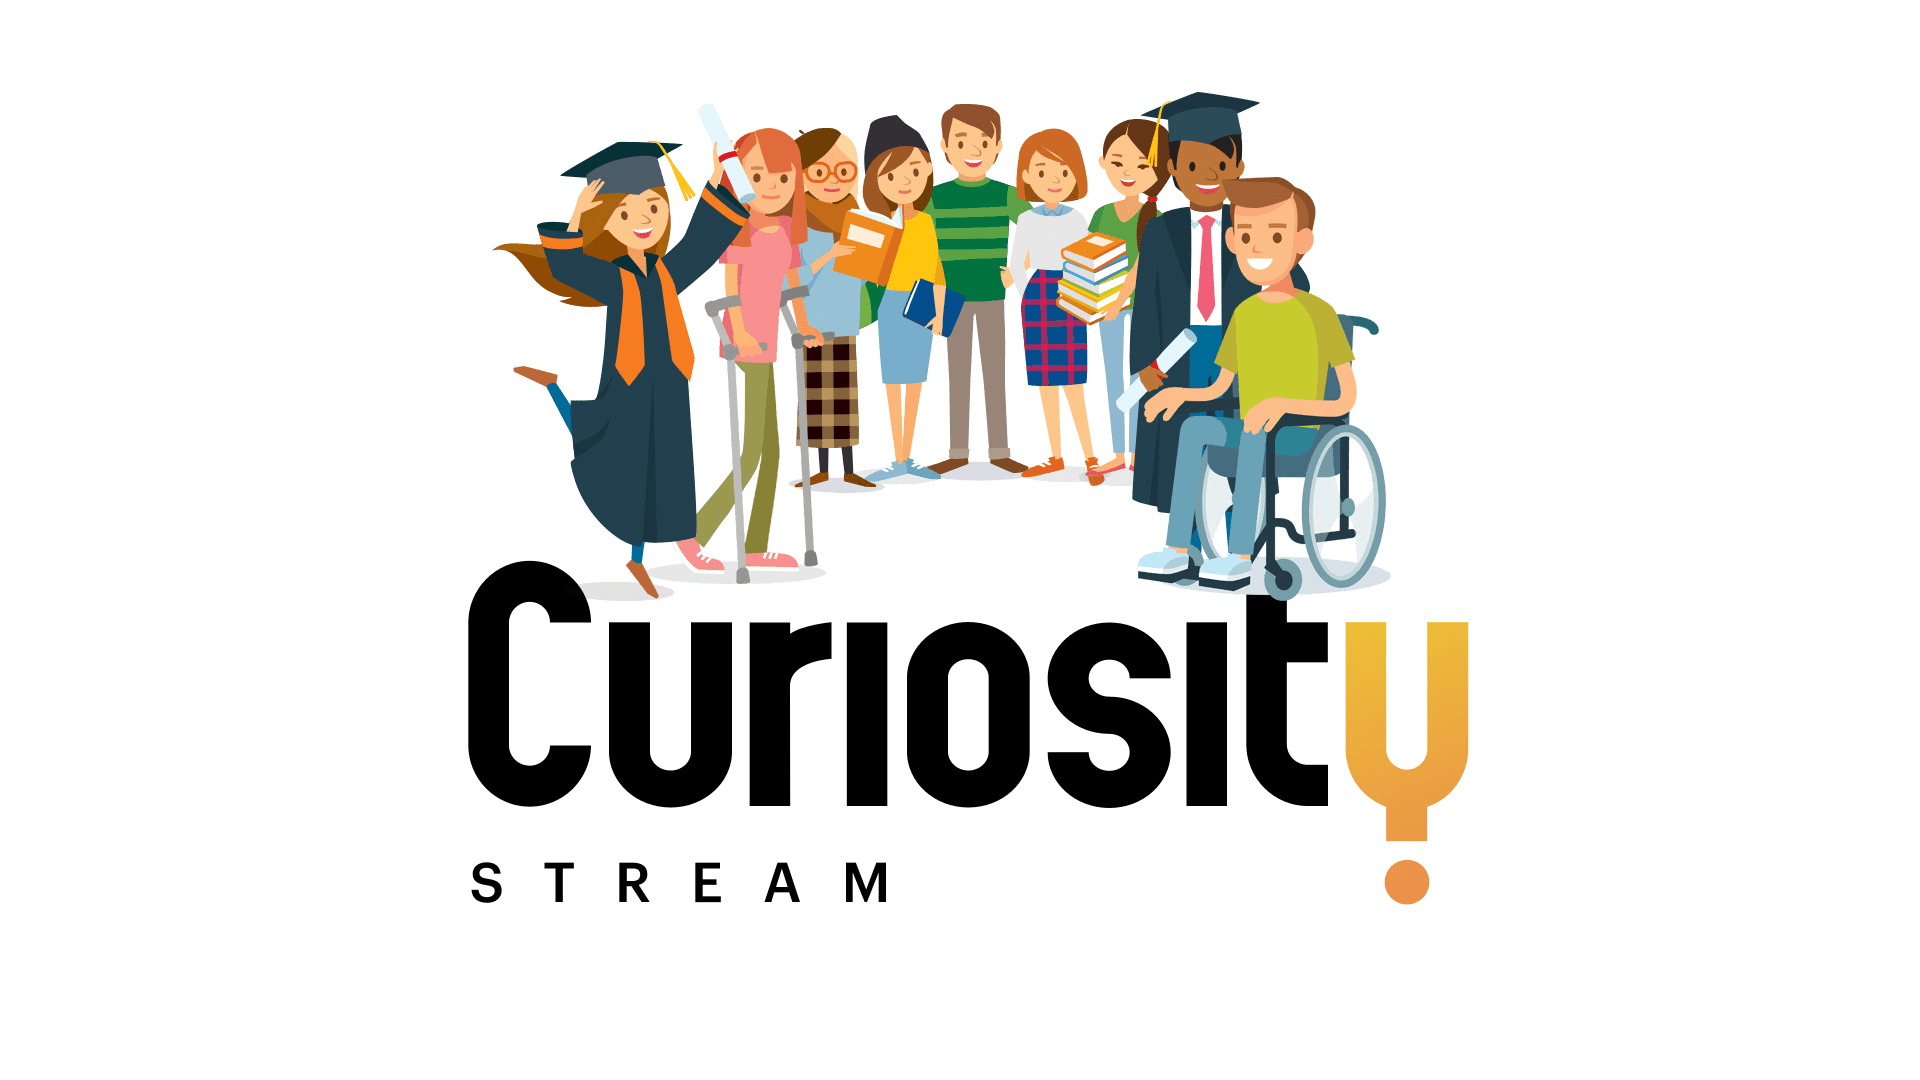 Take advantage of the unlimited number of subscriptions for schools and businesses to get a bulk discount on CuriosityStream.